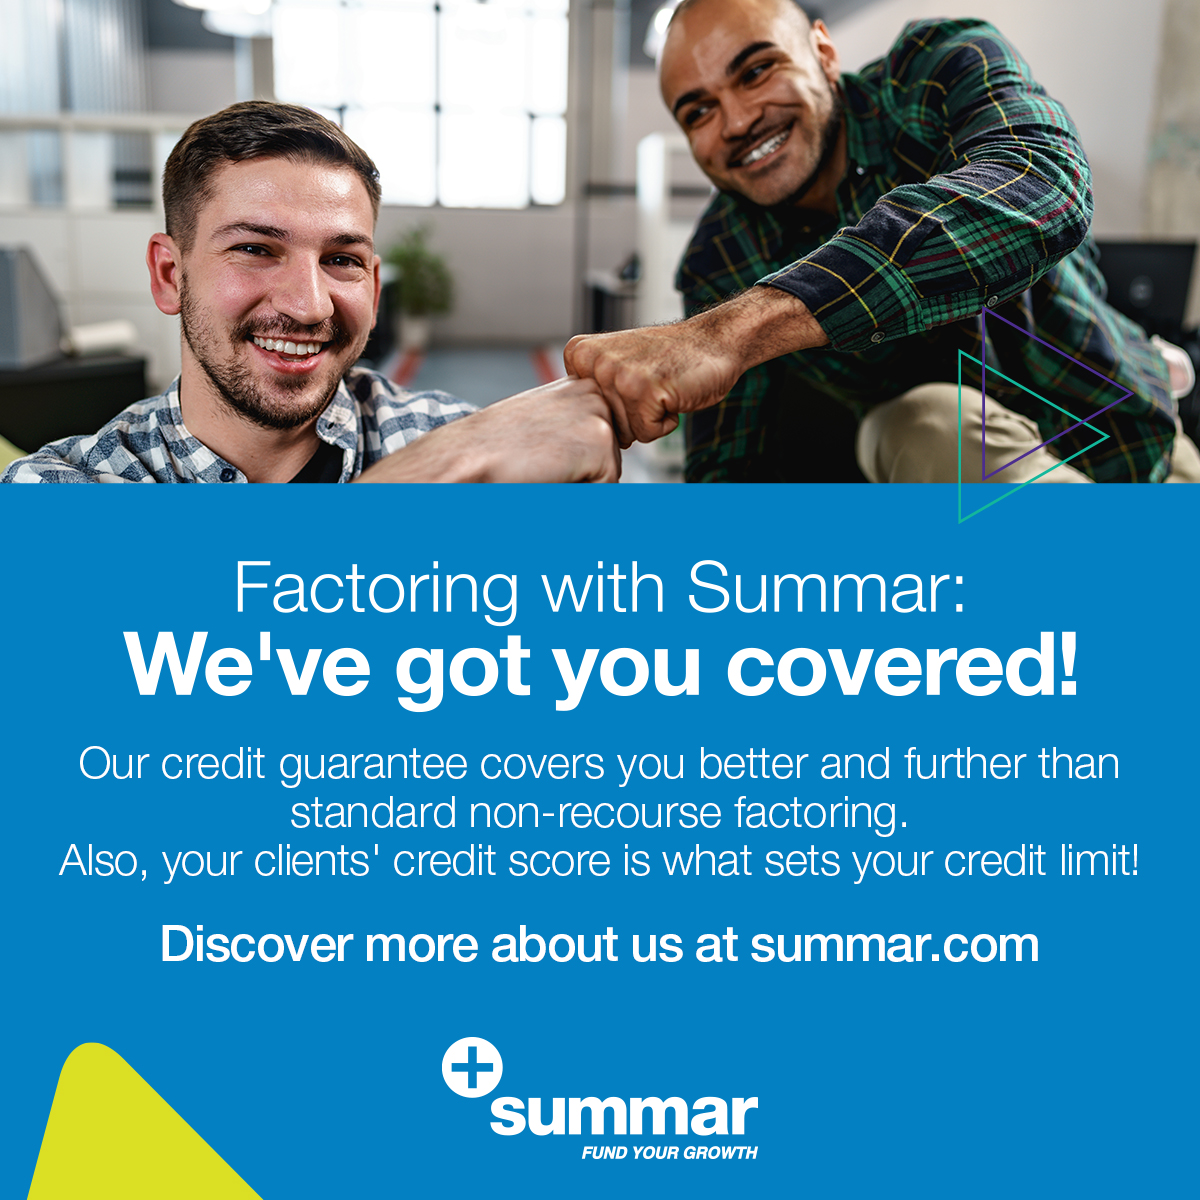 With Summar, your money is protected all the time! We're more than non-recourse #factoring; we are the #funding partner that got you covered! 

Discover more at summar.com.